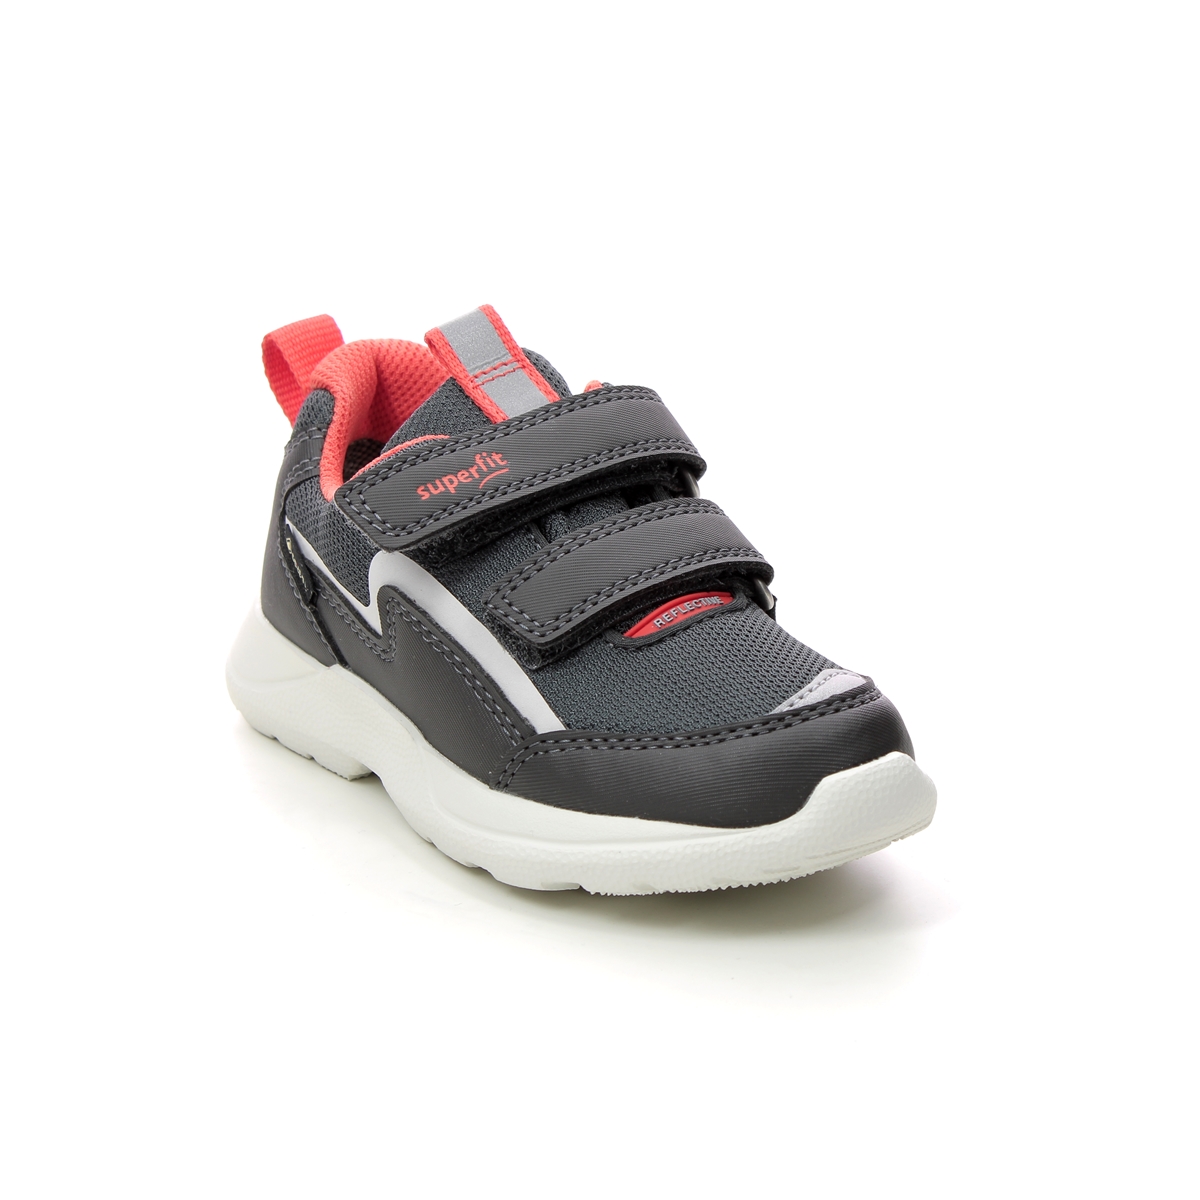 Superfit Rush Mini Gtx Black Red Kids Trainers 1006212-2000 In Size 28 In Plain Black Red For kids